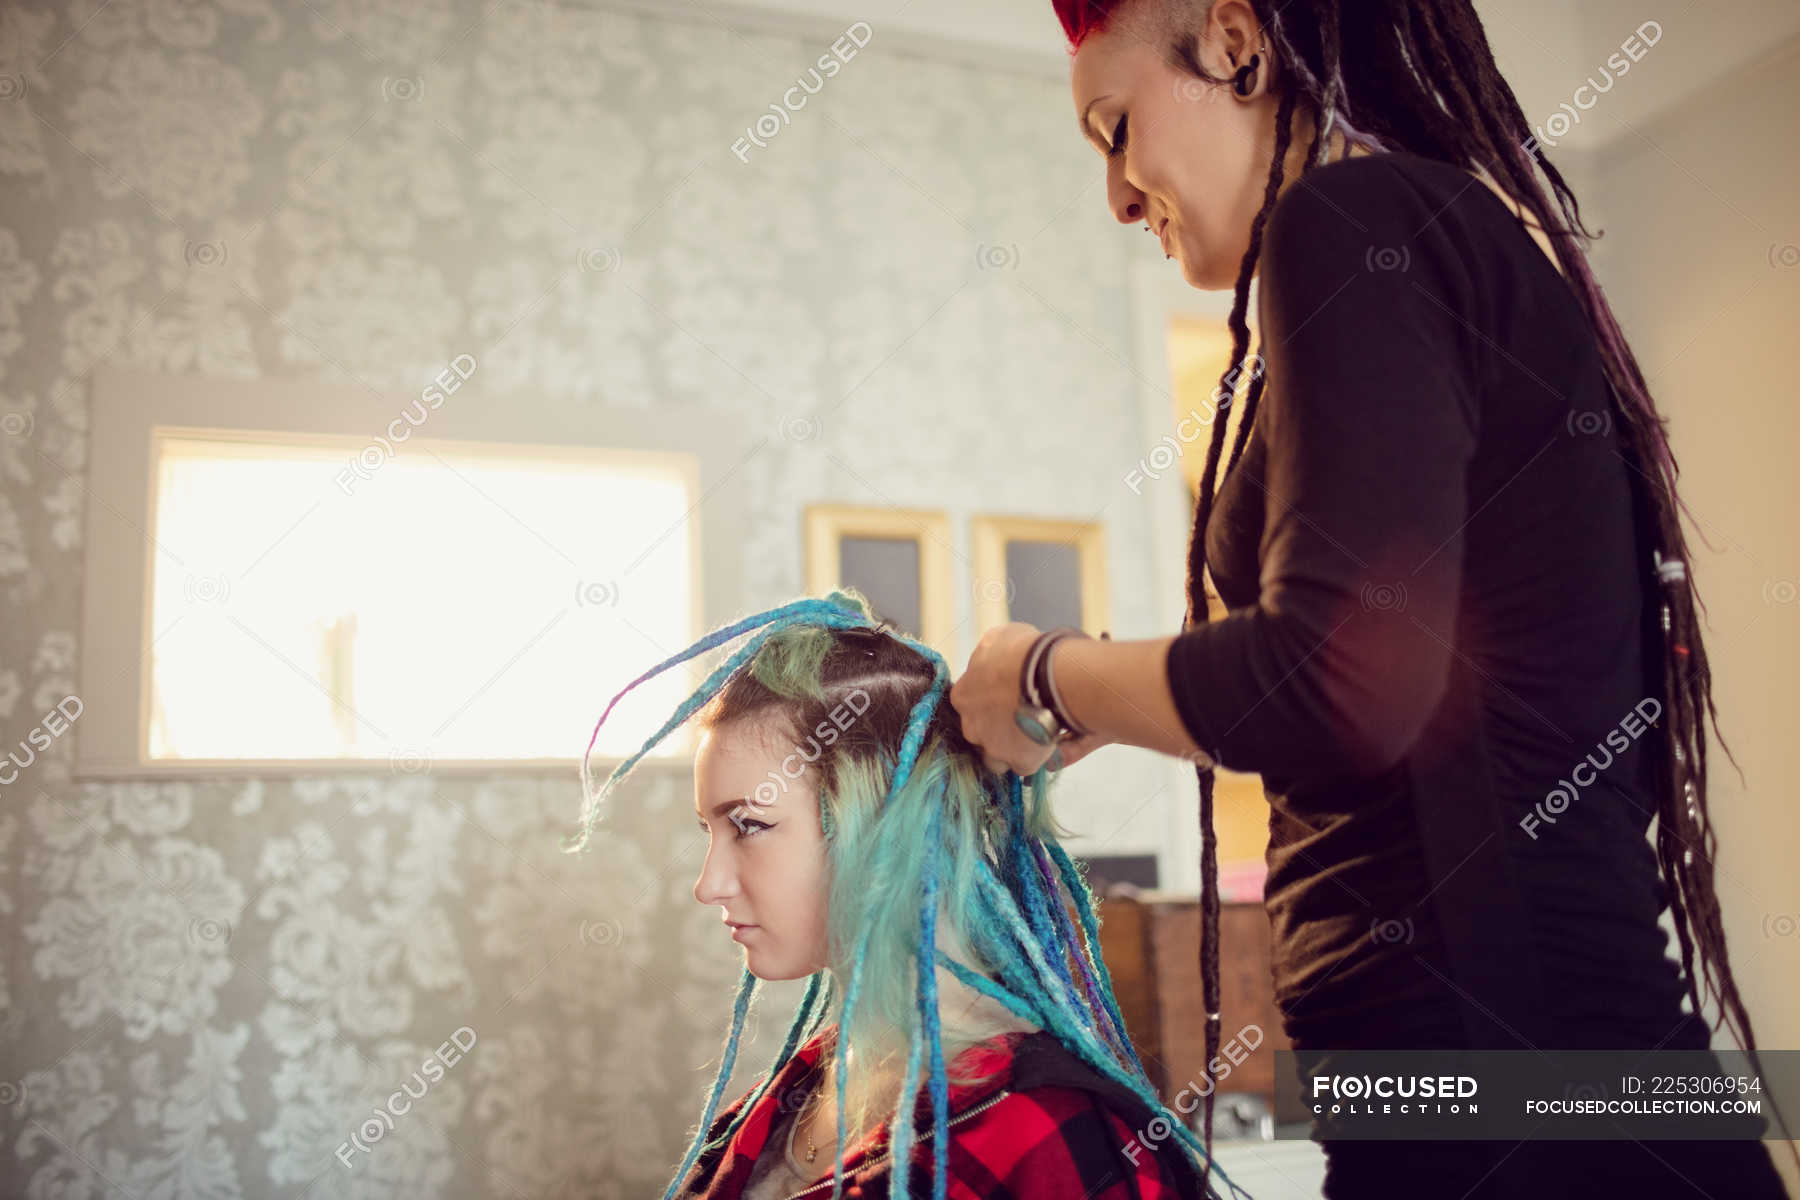 Beautician styling clients hair in dreadlocks shop — profession, braid -  Stock Photo | #225306954